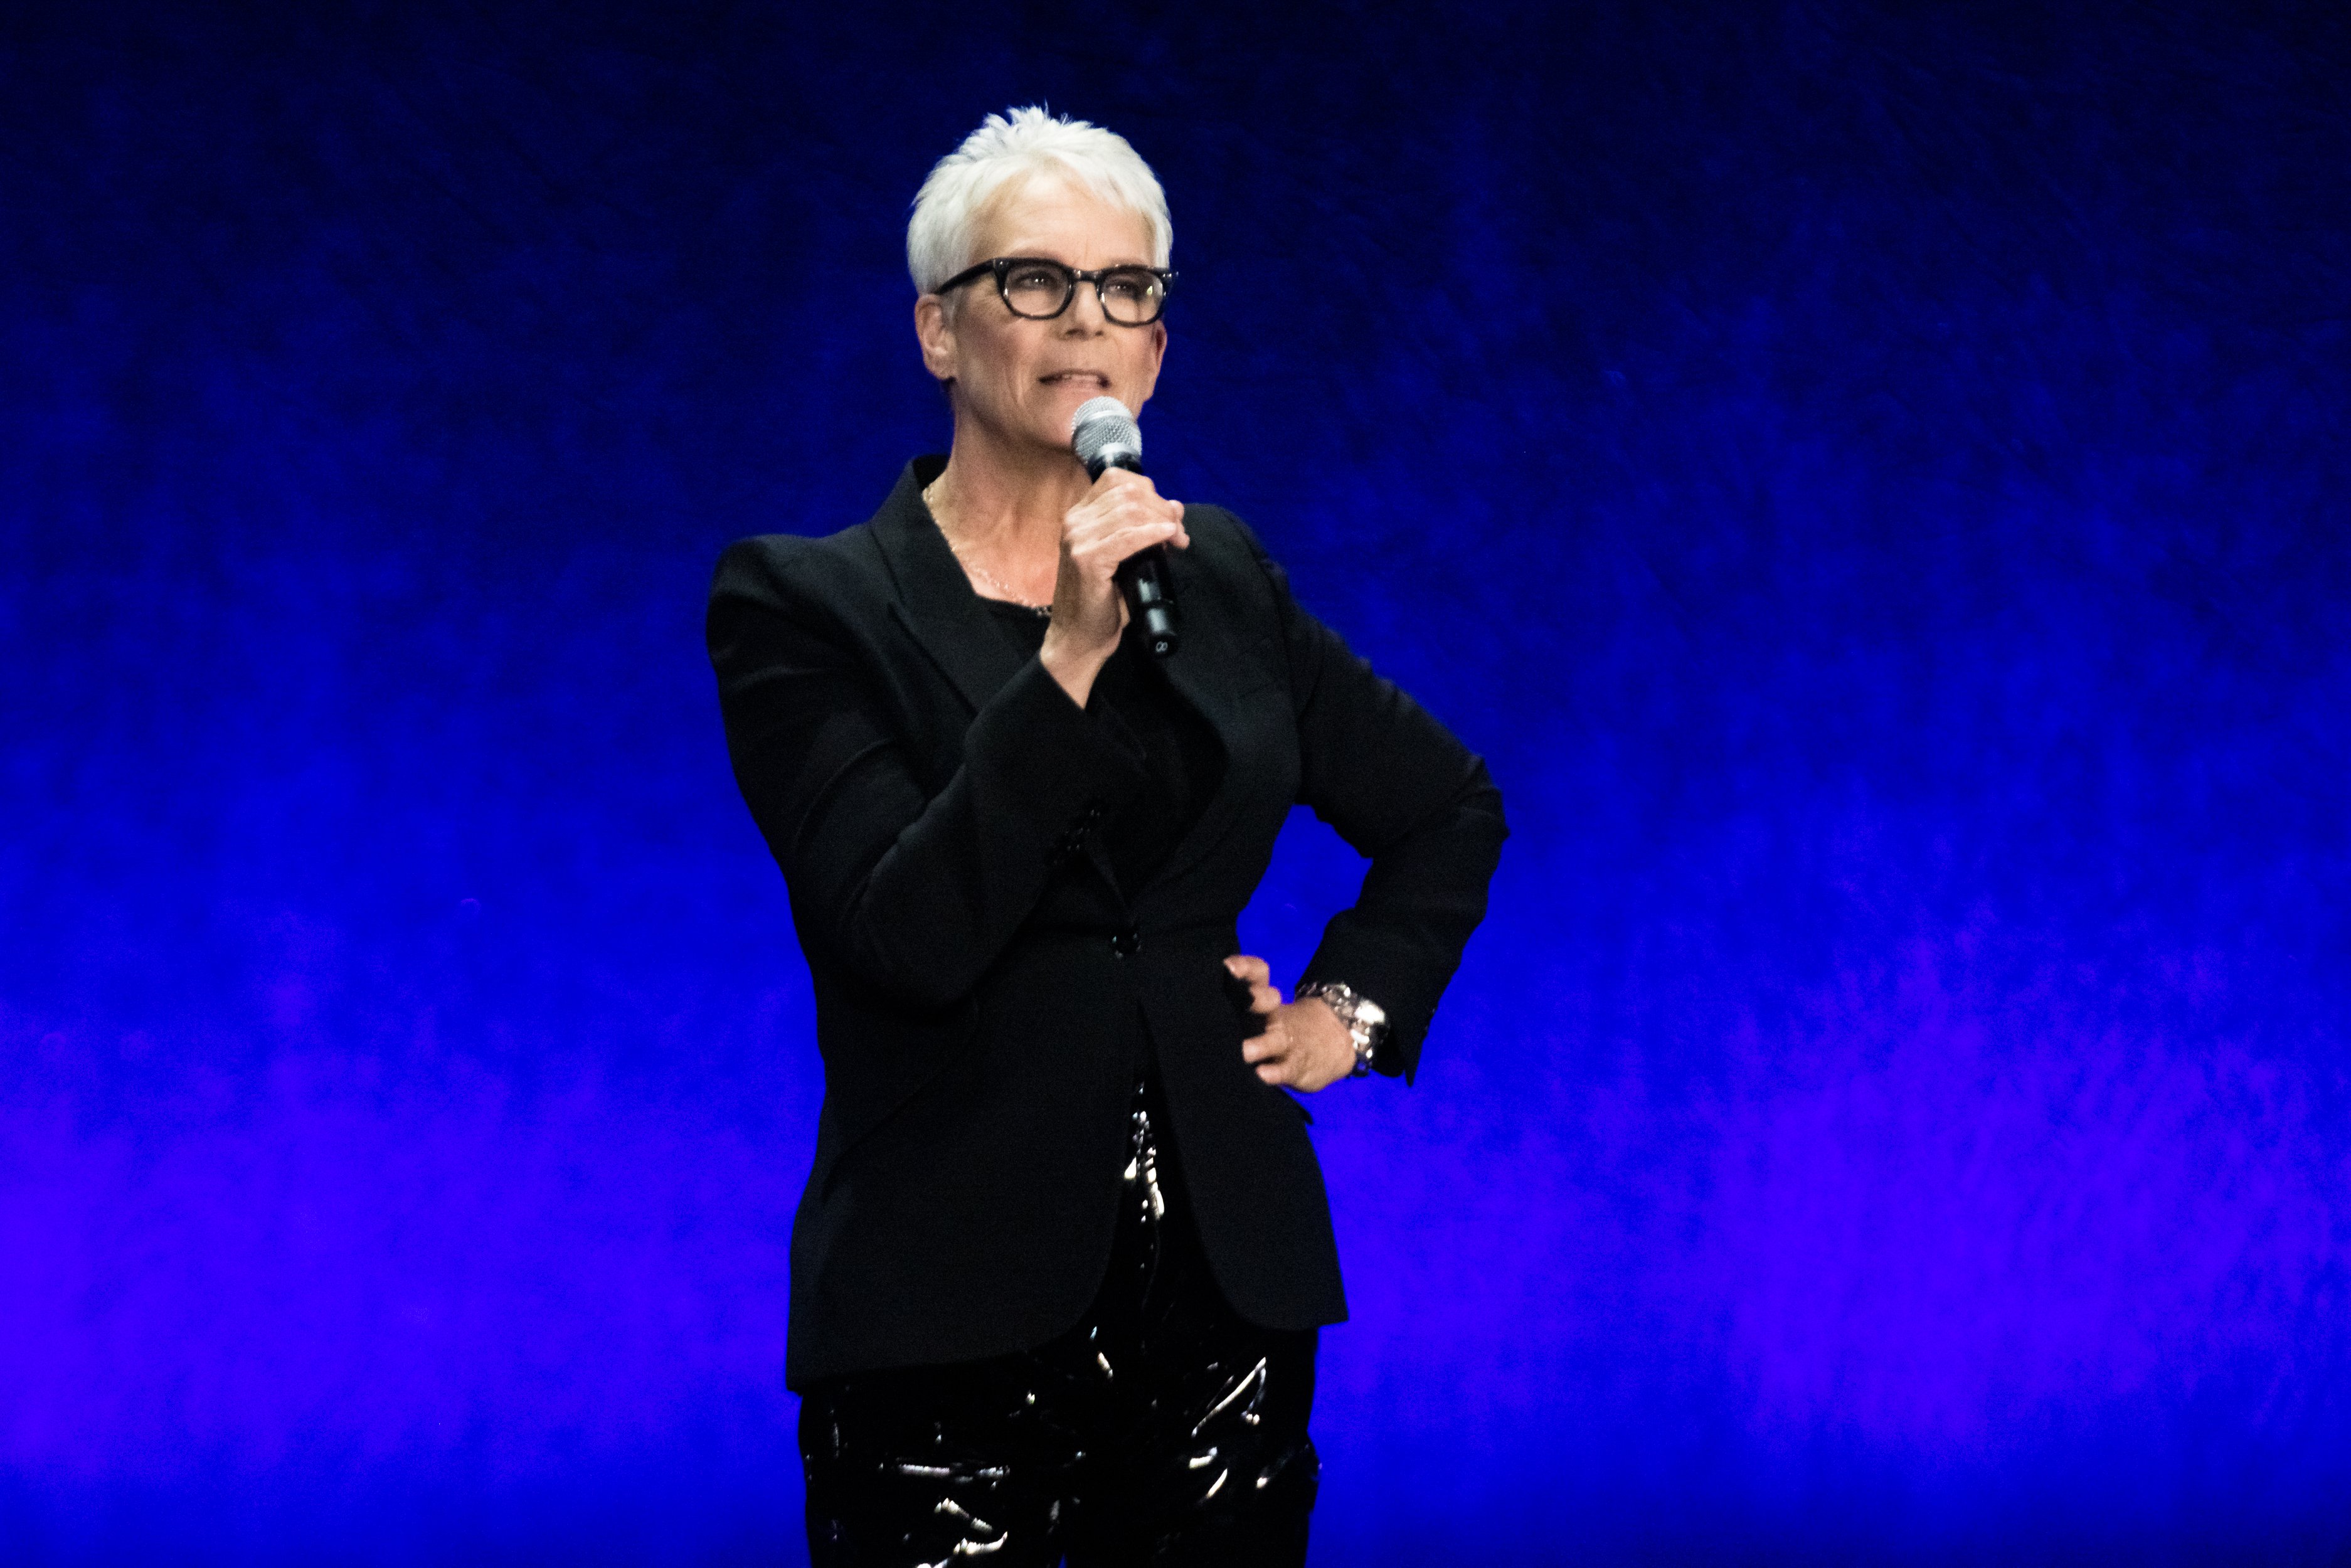 Actress Jamie Lee Curtis speaks about her upcoming movie "Halloween Ends" during Universal Pictures and Focus Features special presentation at Caesars Palace during CinemaCon 2022, the official convention of the National Association of Theatre Owners, on April 27, 2022 in Las Vegas, Nevada. | Source: Getty Images